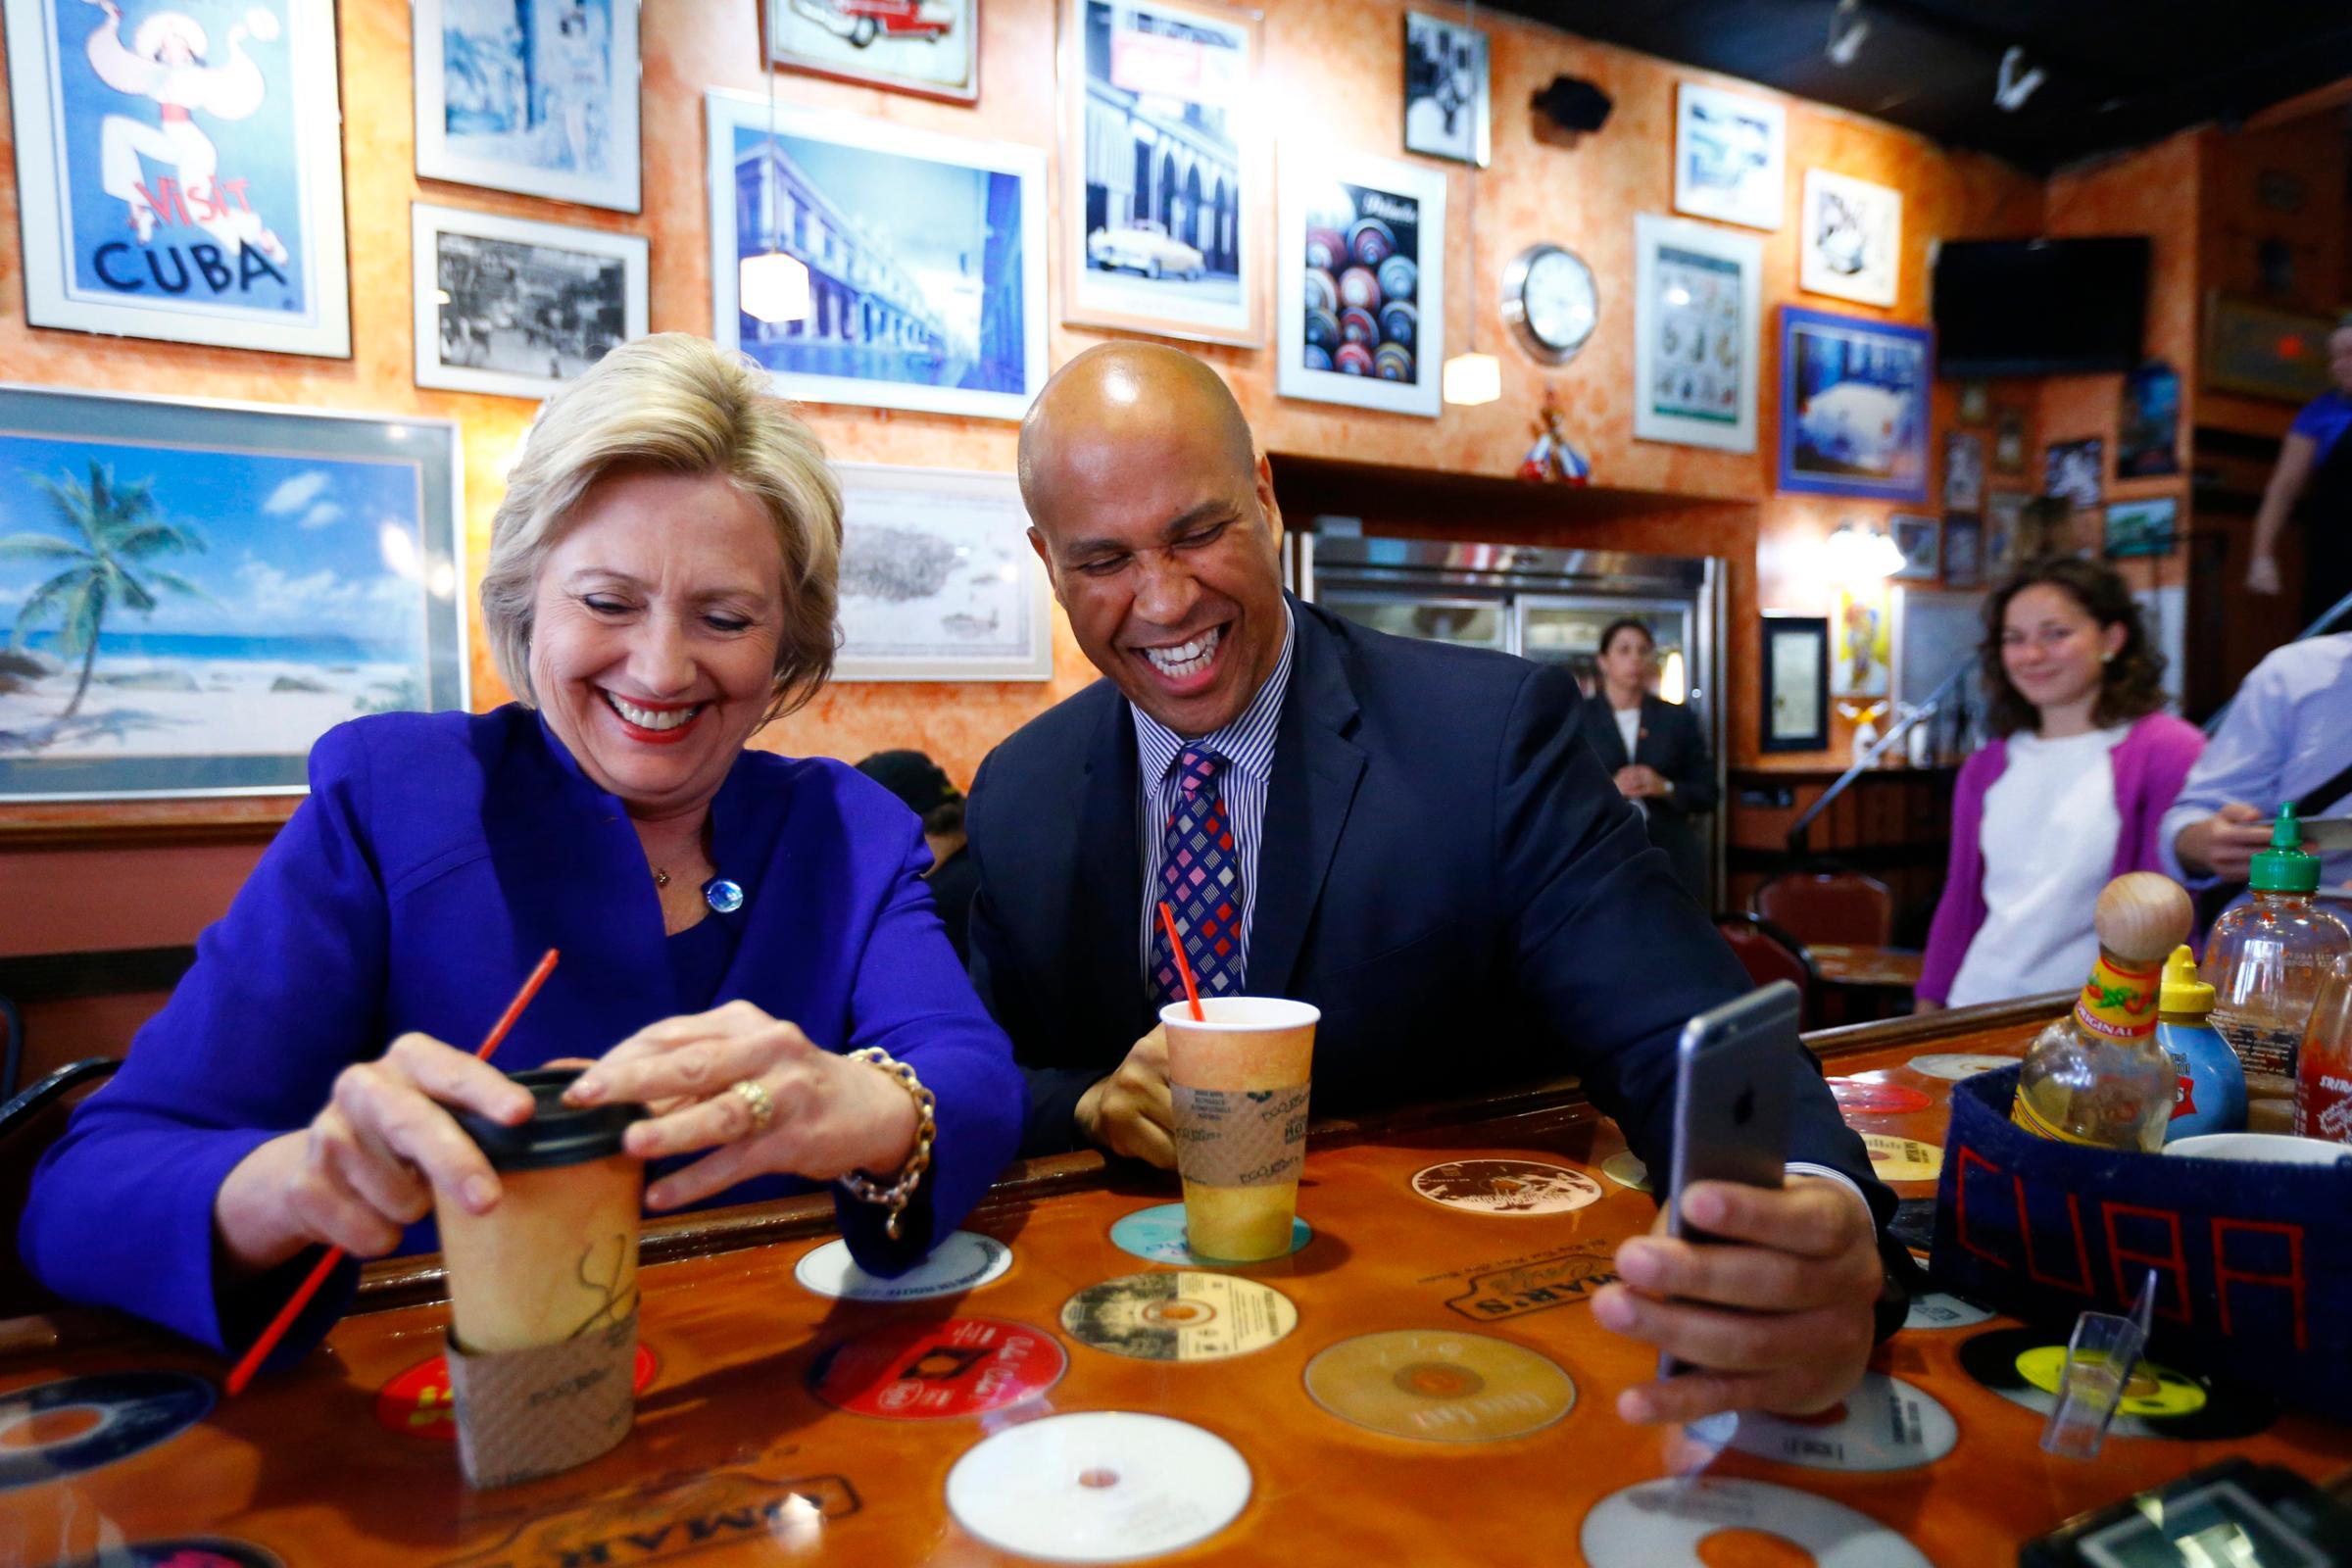 Democratic presidential candidate Hillary Clinton talks with Sen. Cory Booker at Omar's Cafe while campaigning, , in Newark on June 1, 2016.